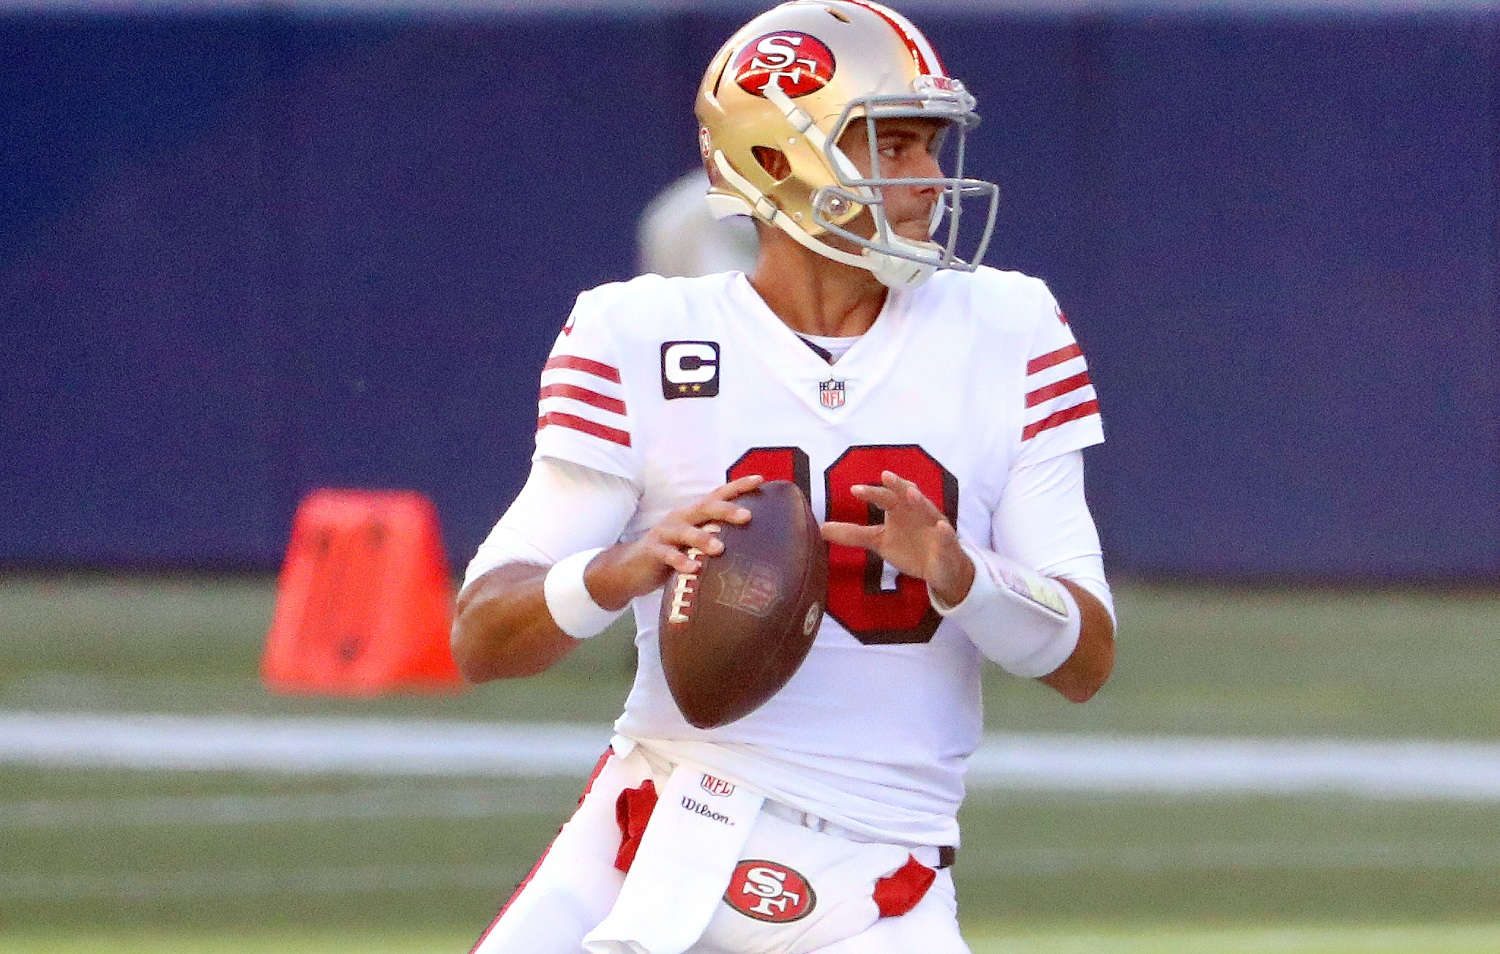 Jimmy Garoppolo of the San Francisco 49ers looks to throw the ball during a 2020 NFL game.